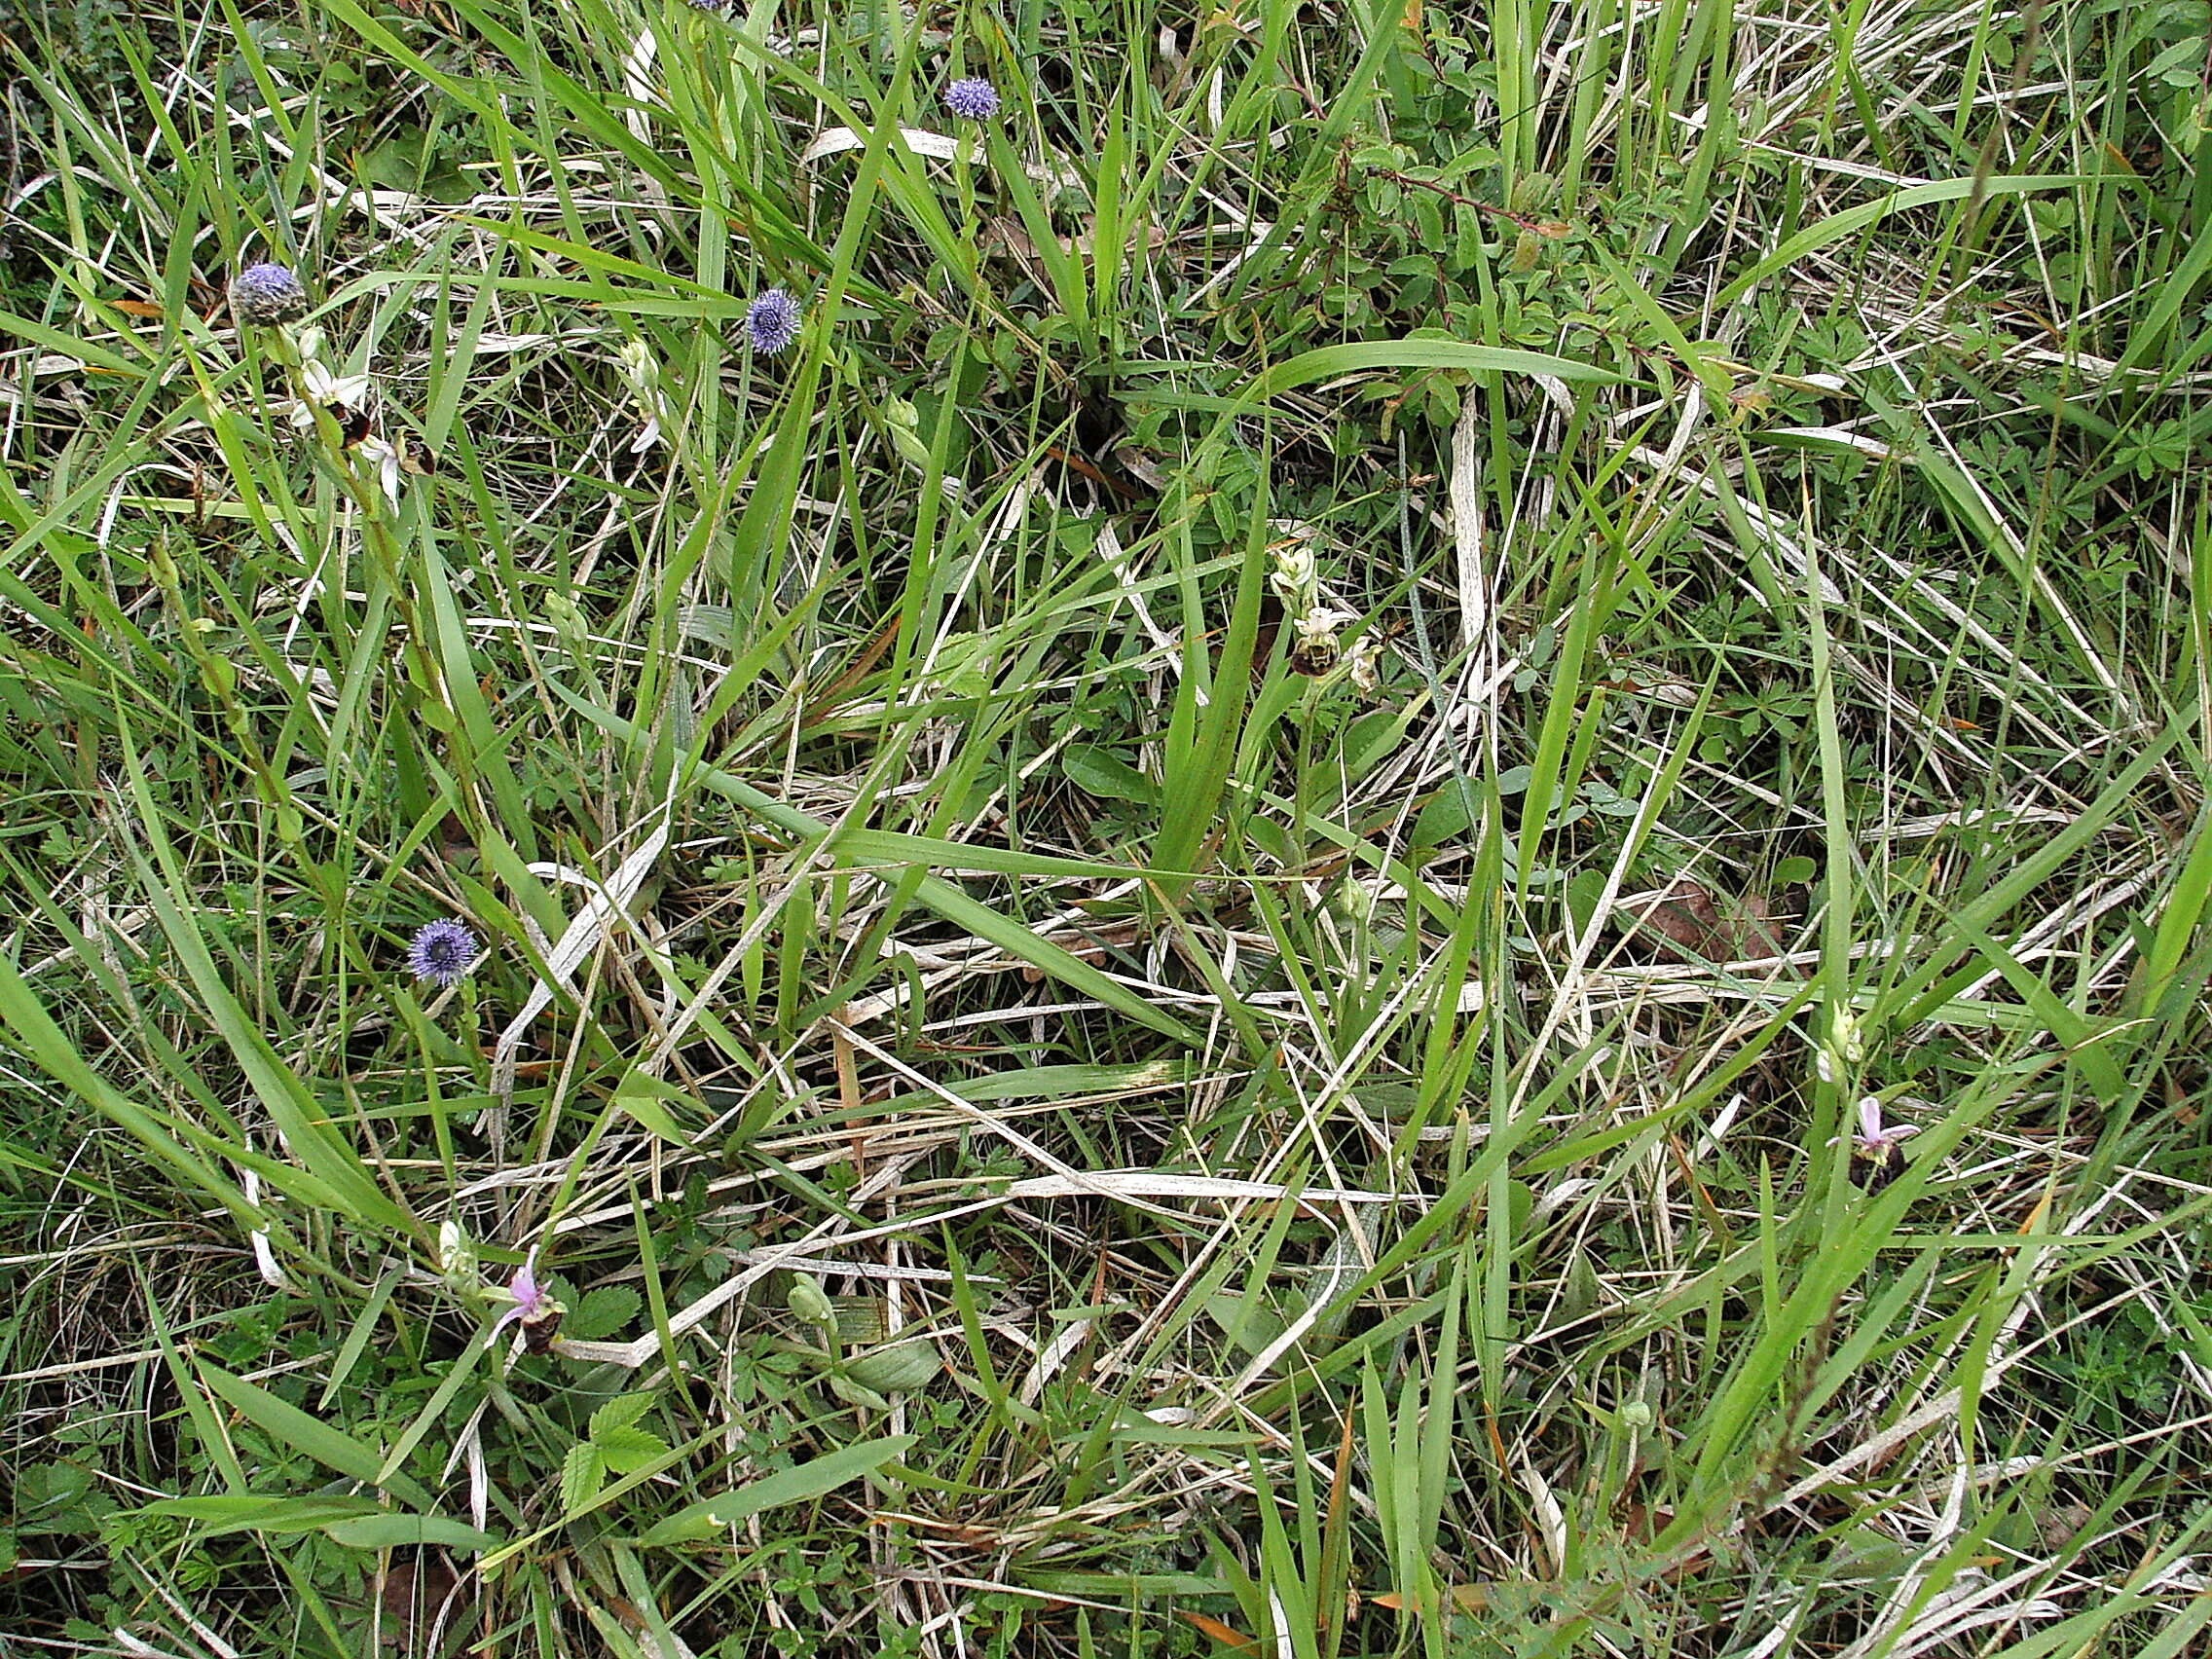 Image of Ophrys holosericea